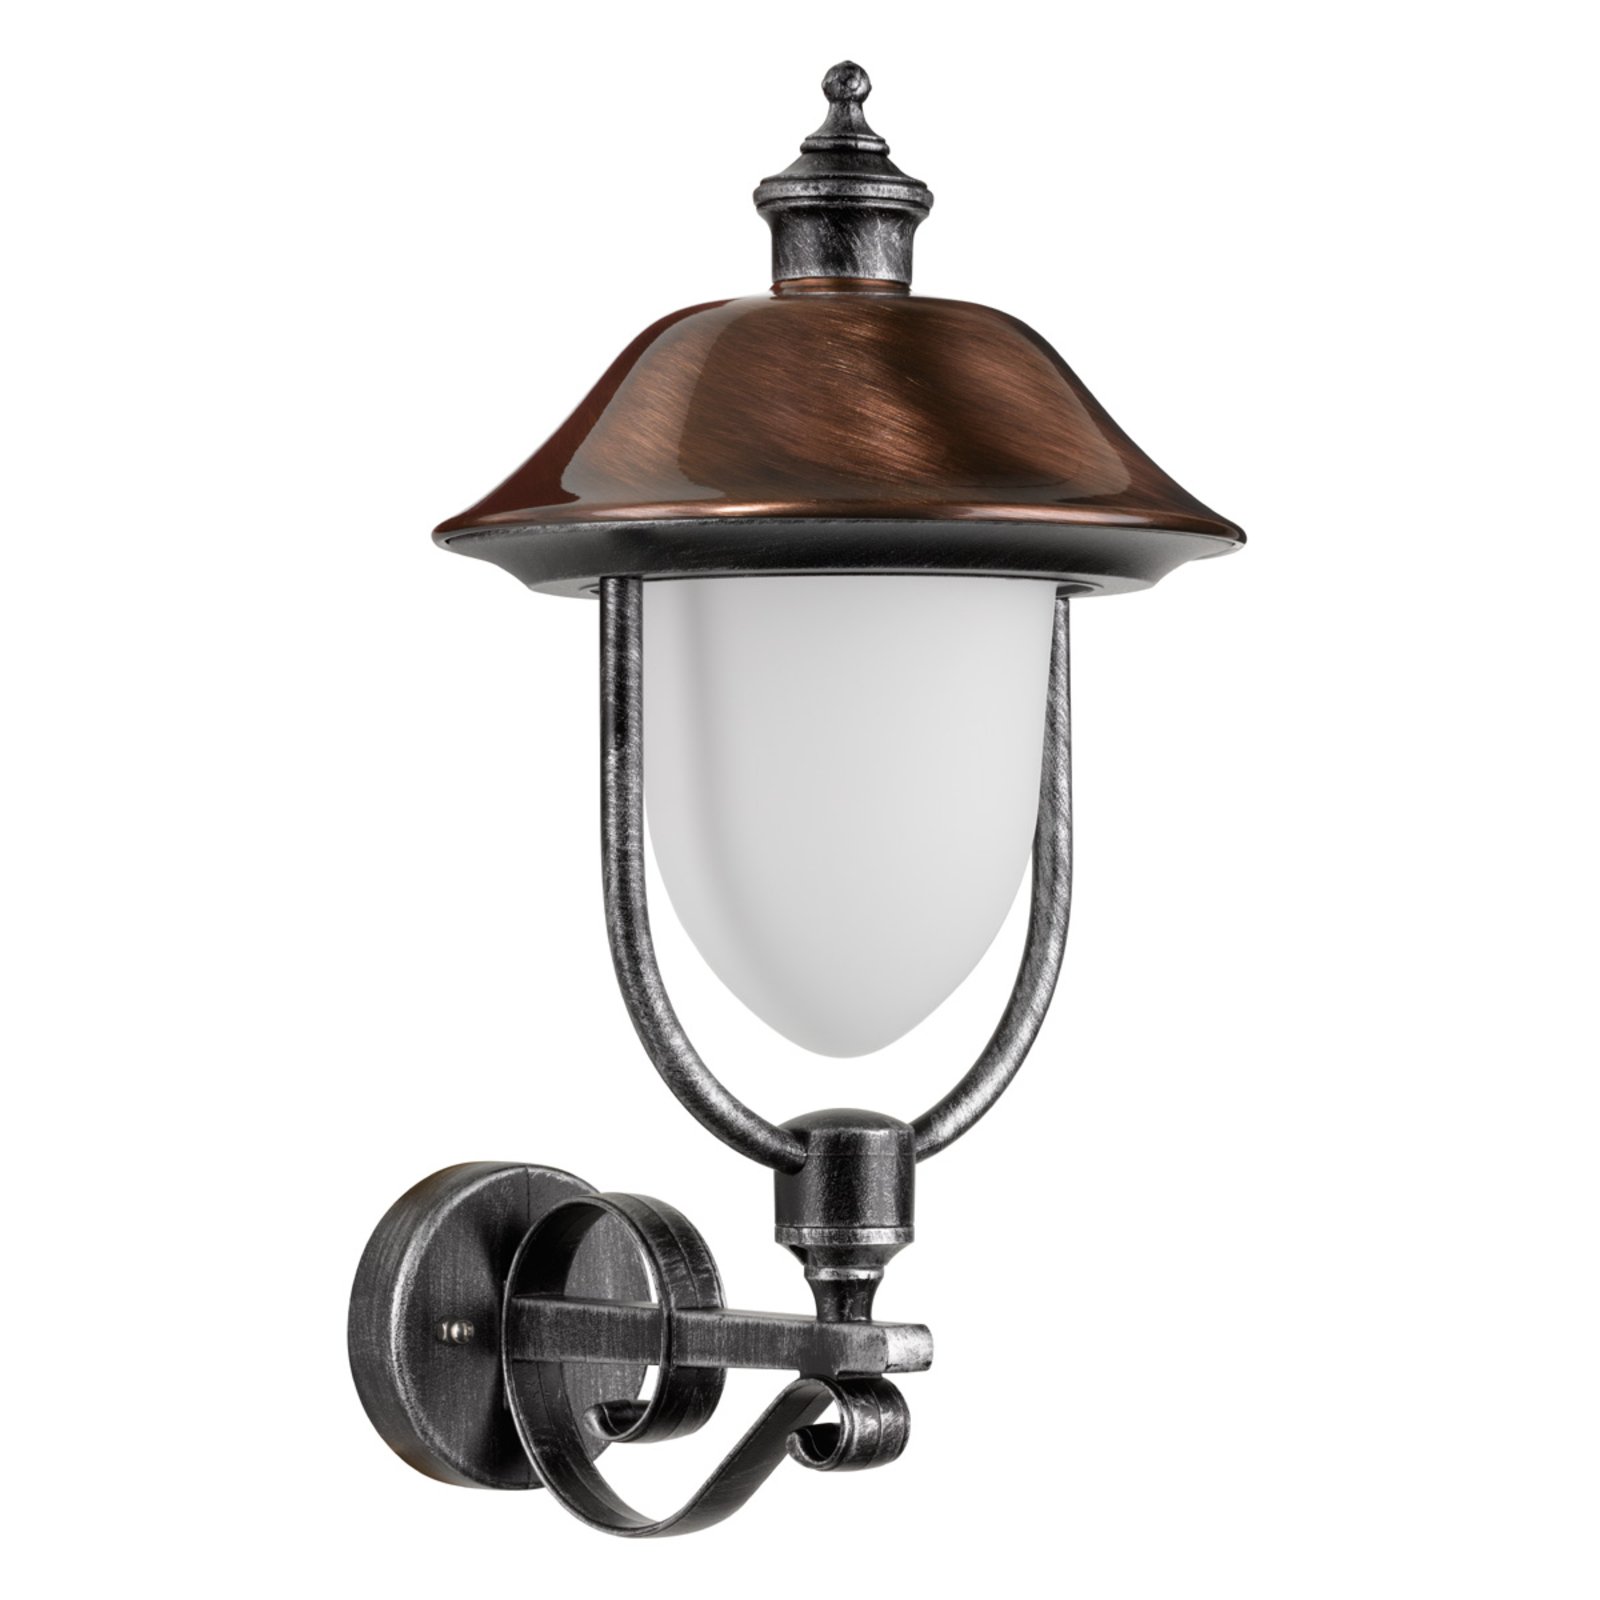 Outdoor wall light Peggy w. copper shade, upright